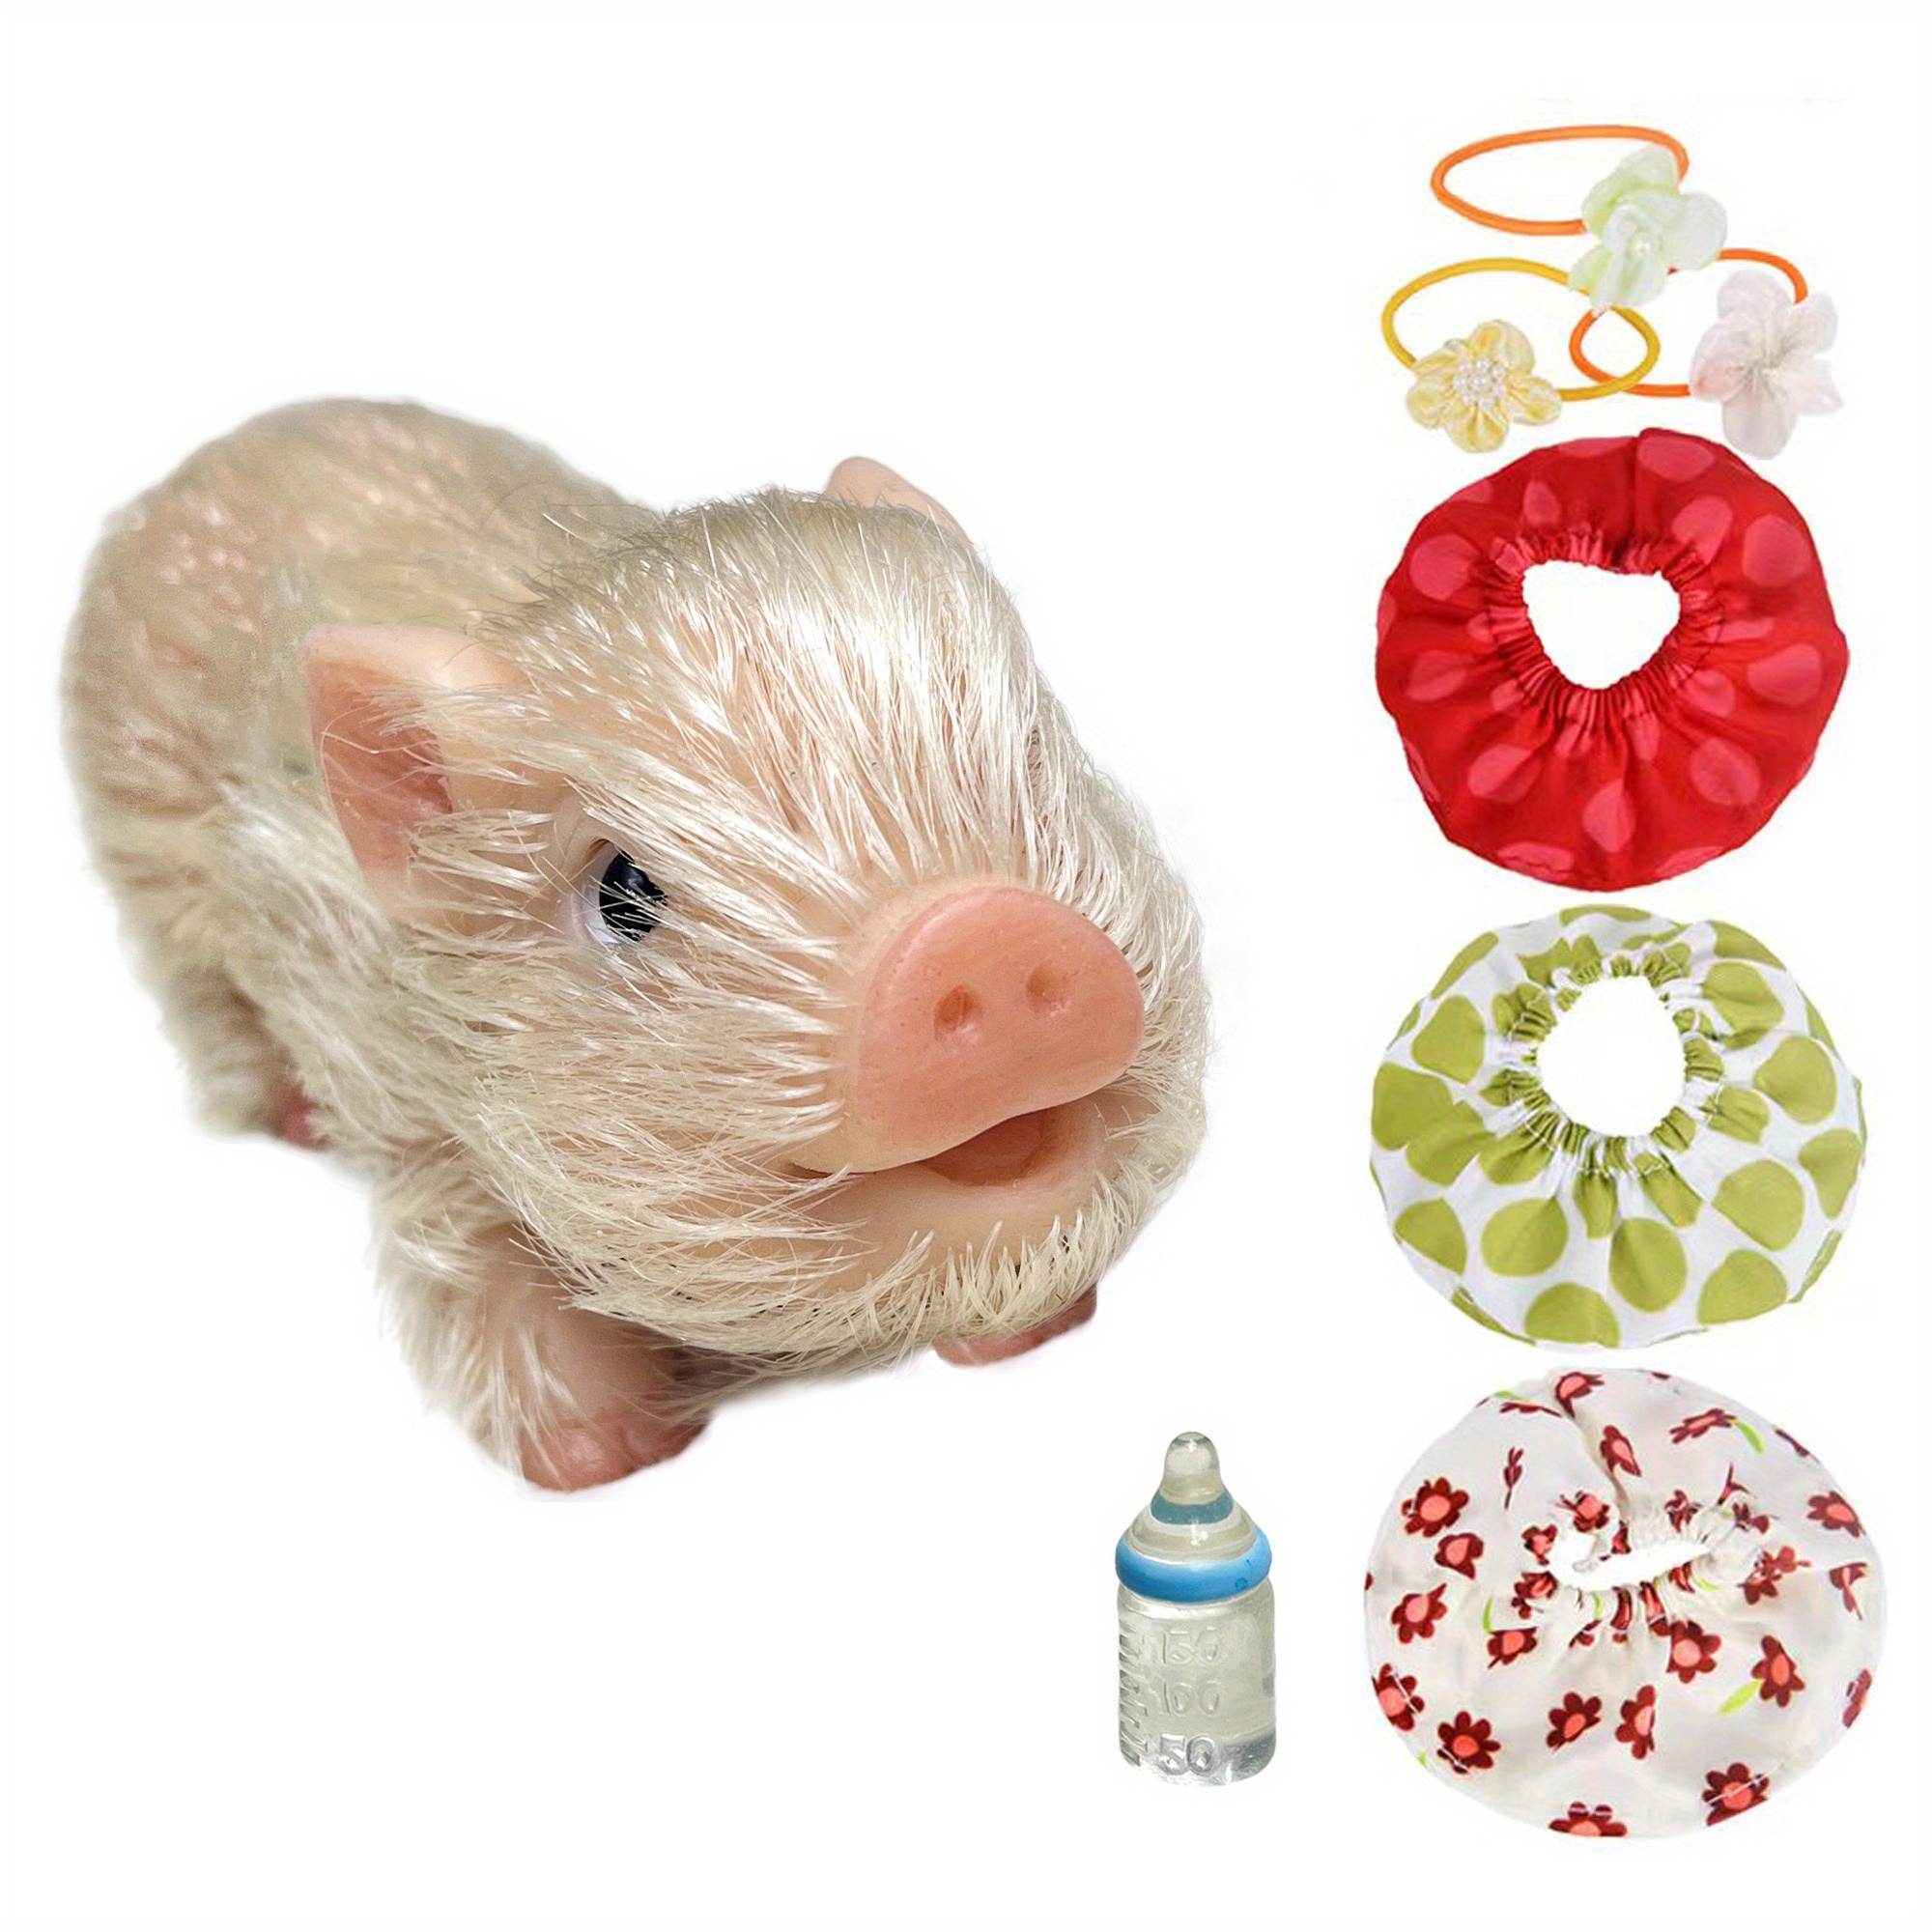 Reborn Silicone Mini Baby Pig Full Body Lifelike Piglet 5inches 